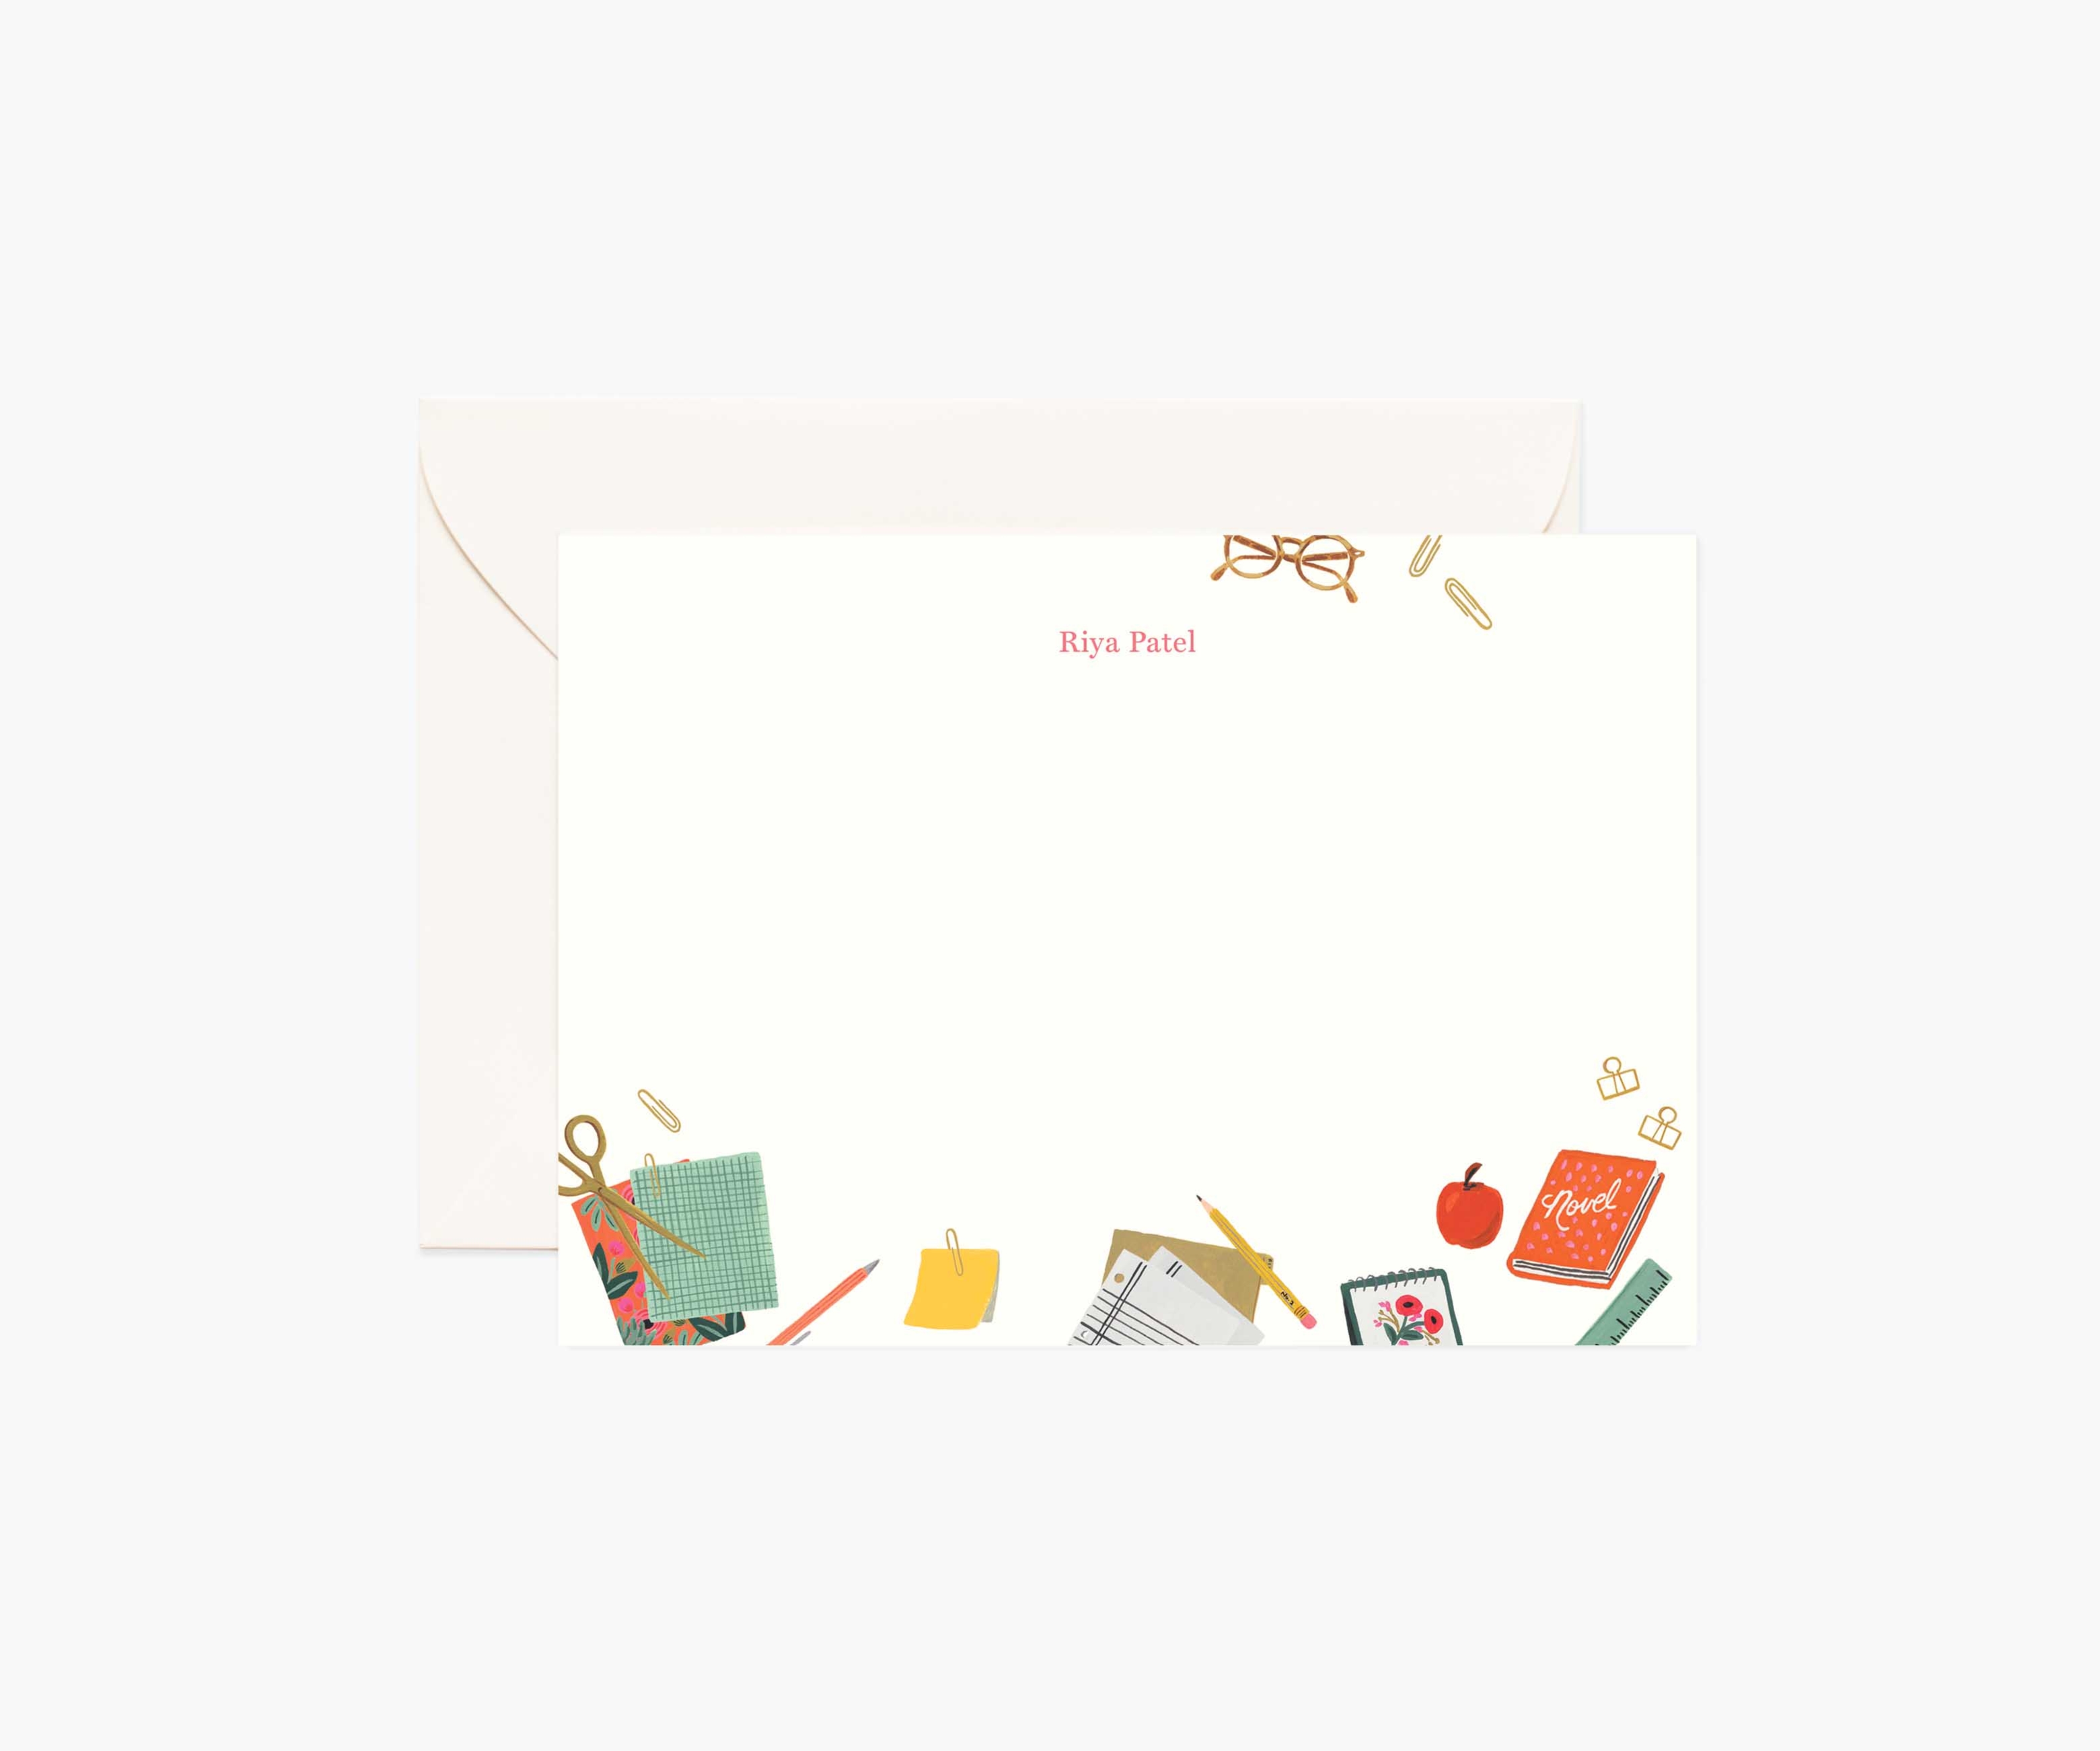 Personalized Gift personalized desk set personalized stationary Personalized Stationery Desk Set Bundle personalized note cards